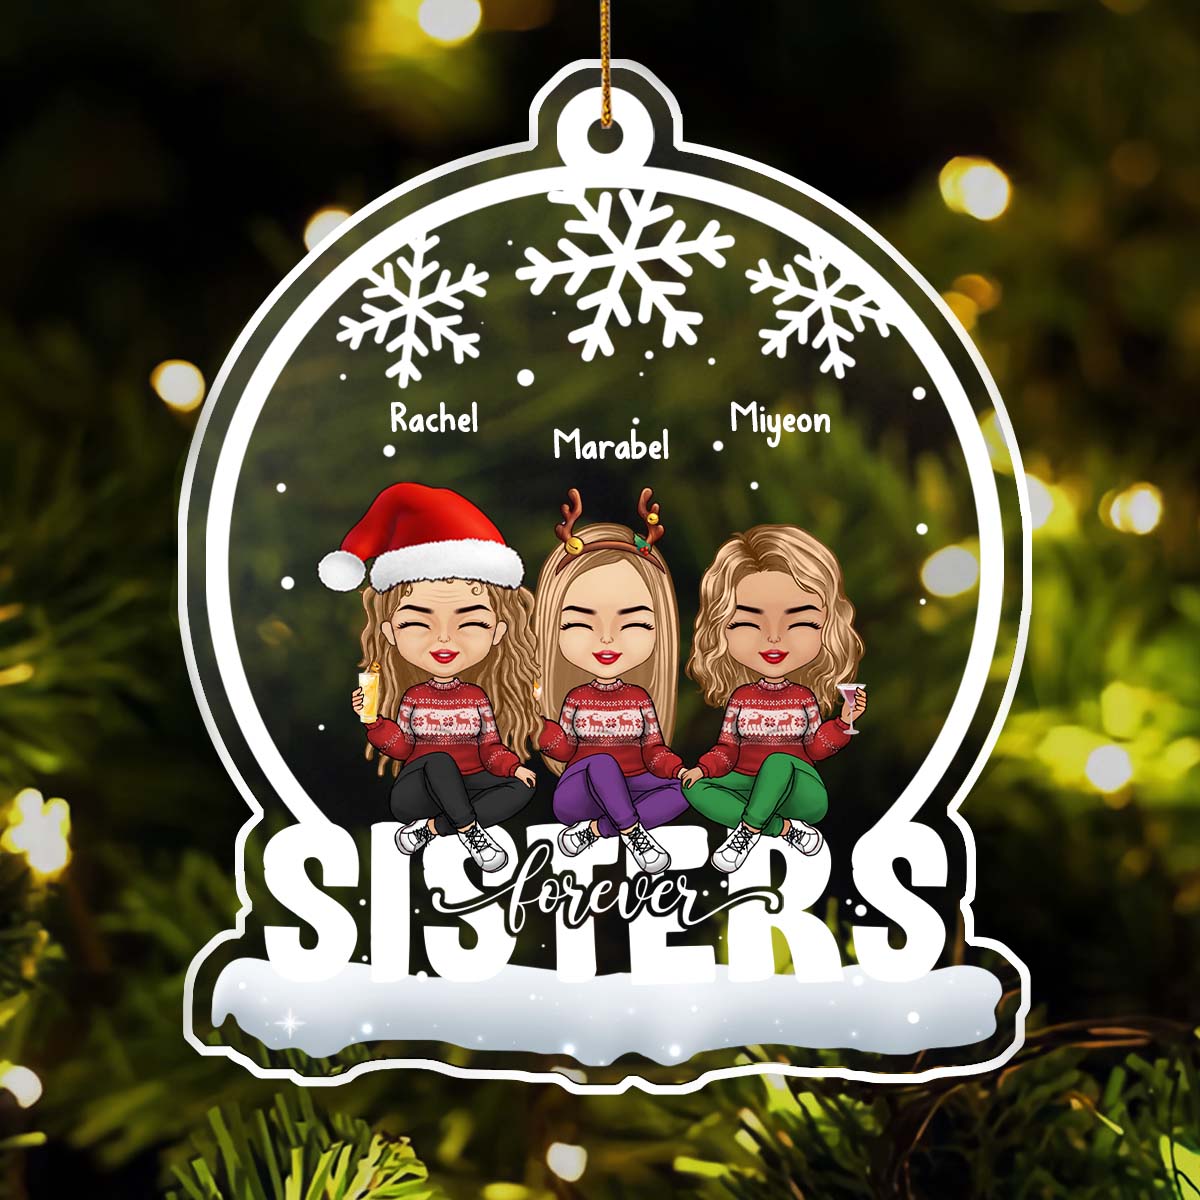 Besties Forever - Bestie Personalized Custom Ornament - Acrylic Snow Globe Shaped - Christmas Gift For Best Friends, BFF, Sisters